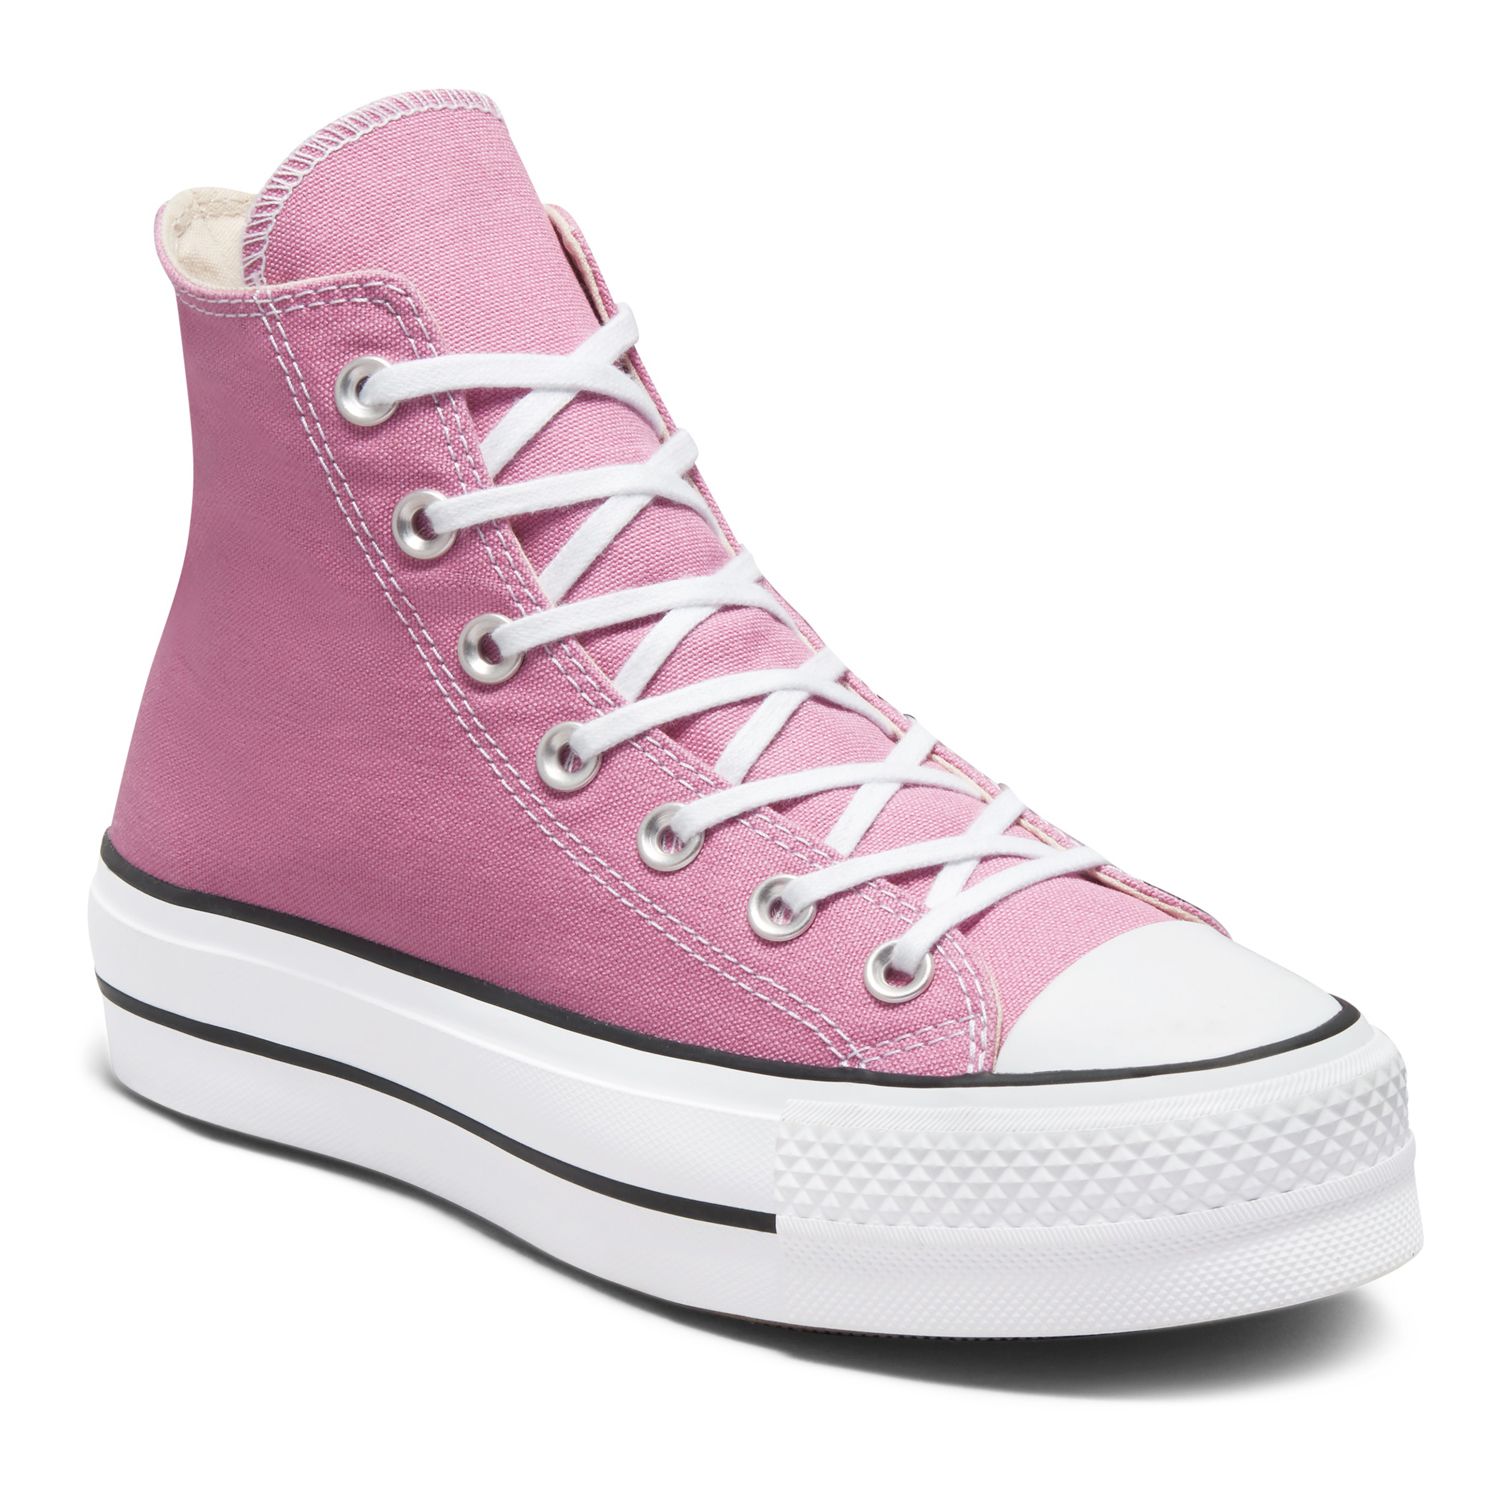 Pale Pink Converse High Topssave Up To 16